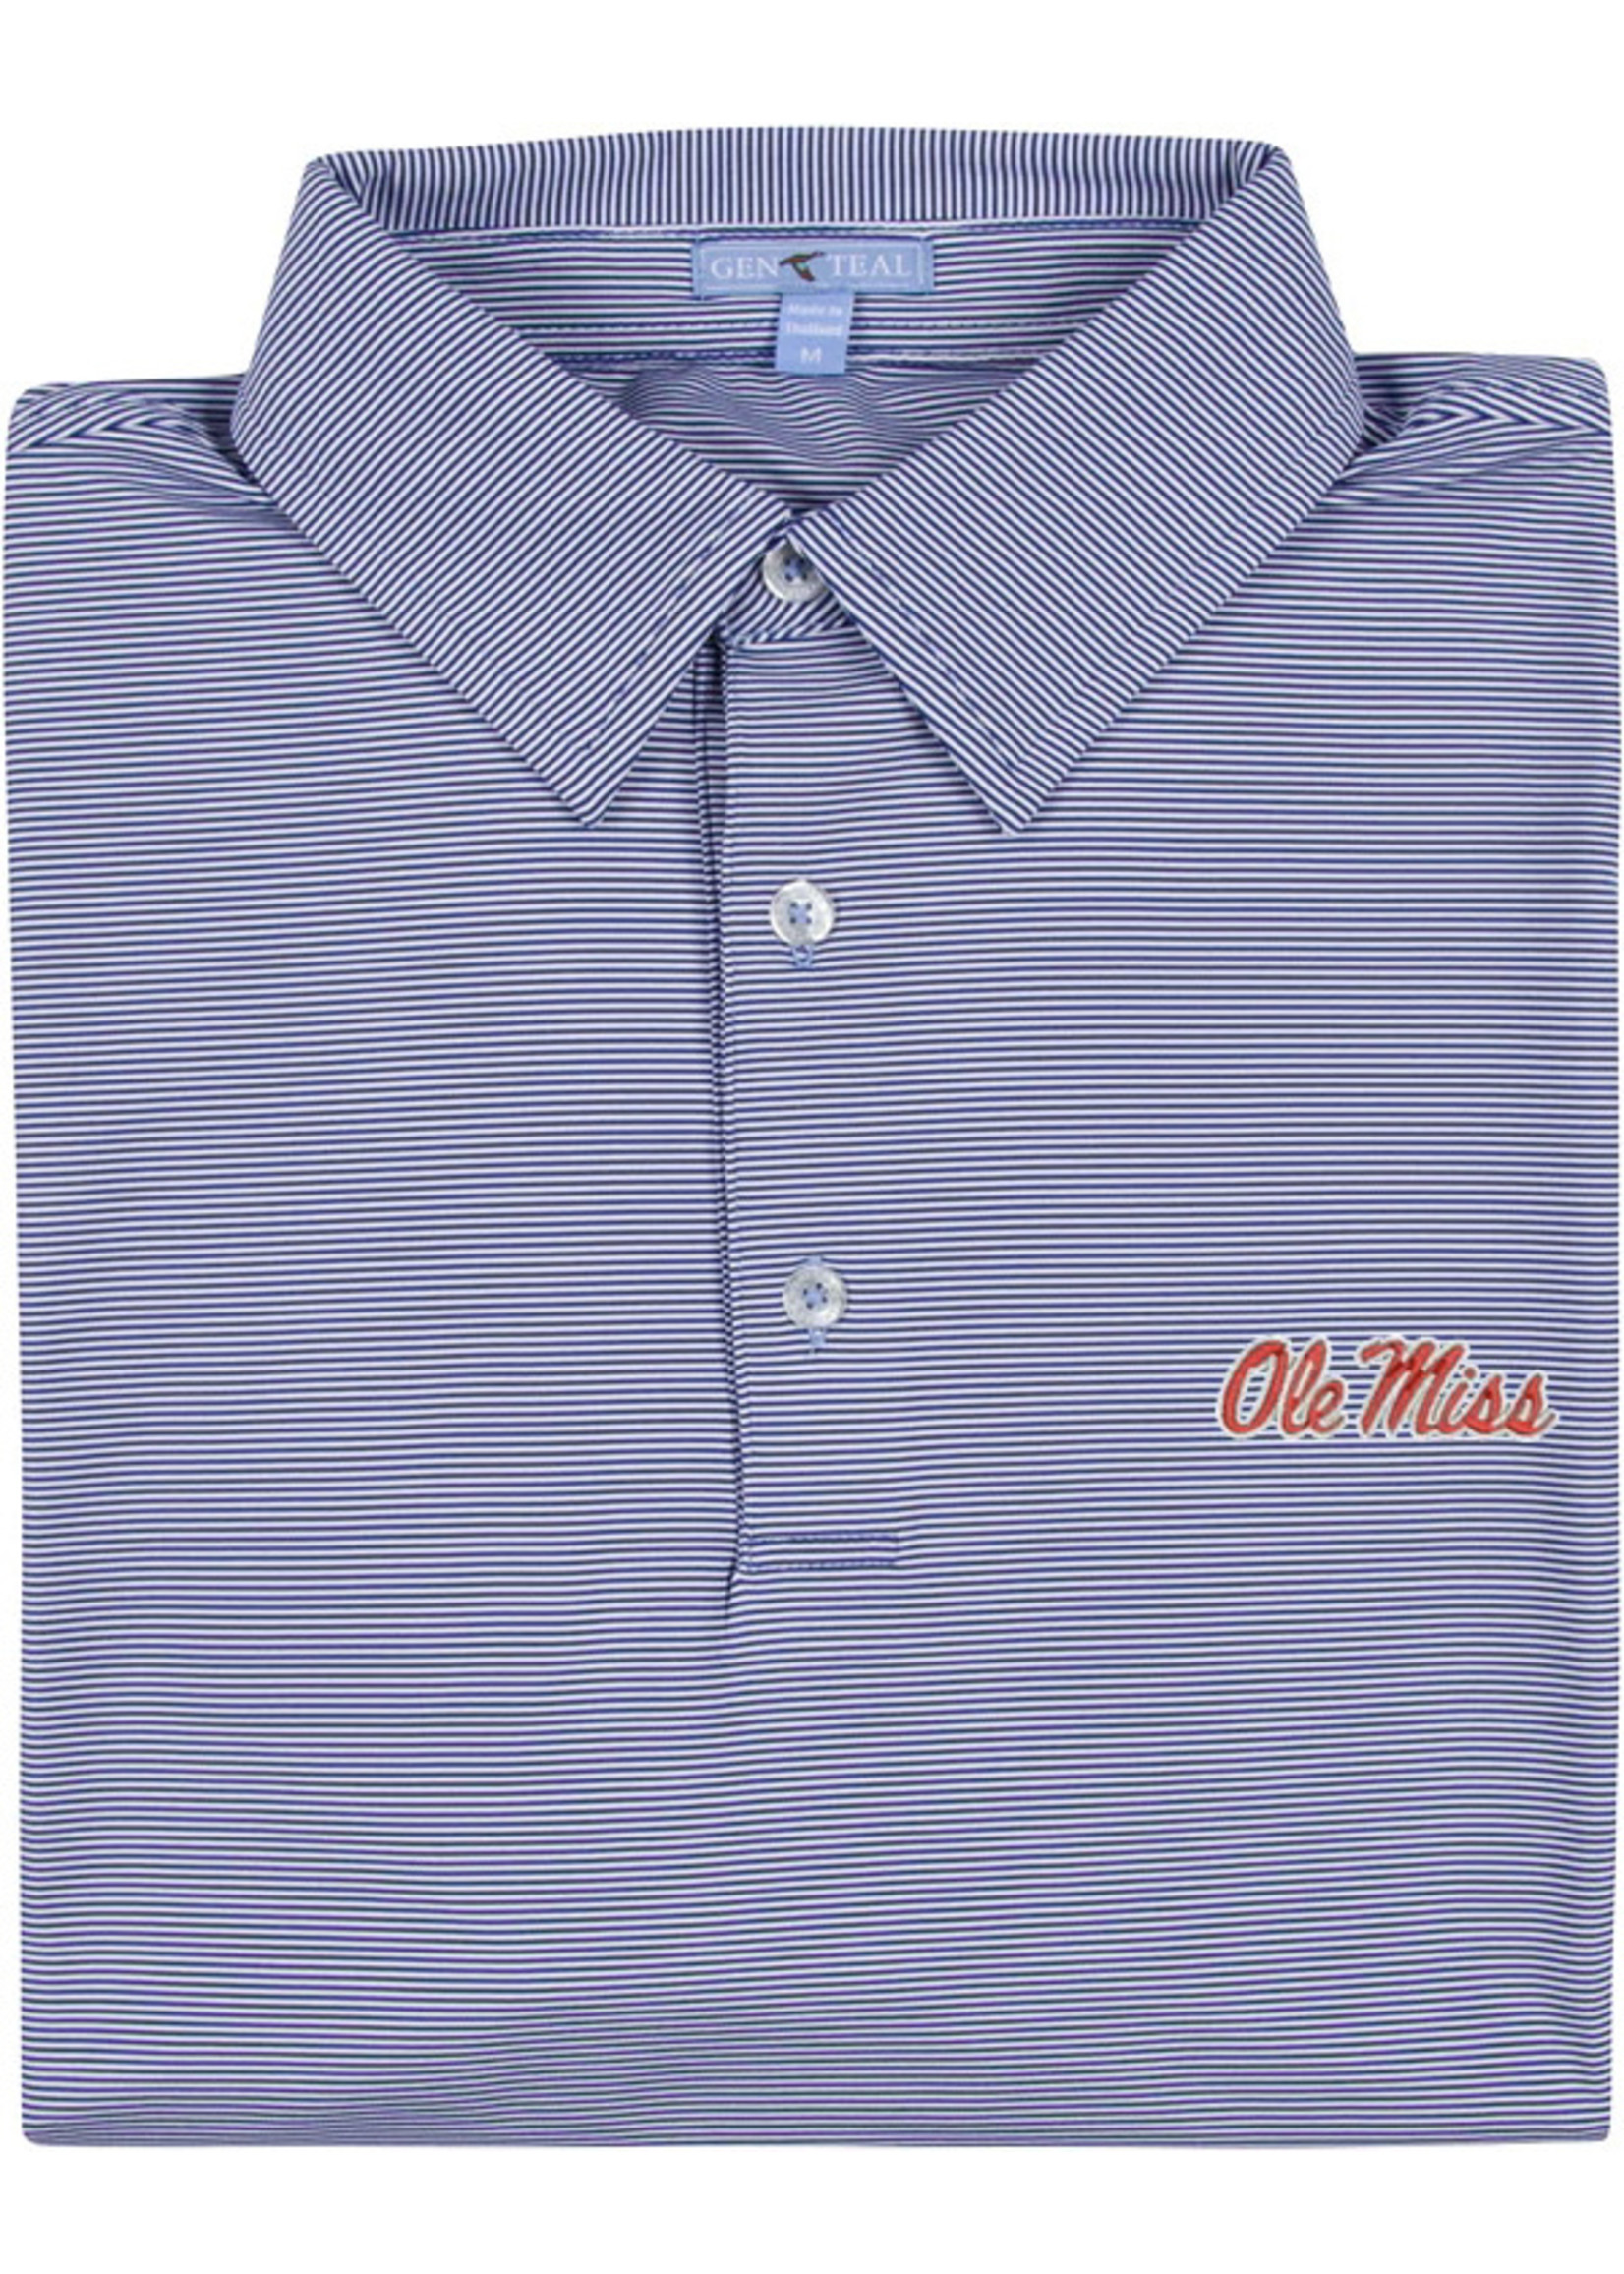 GenTeal Apparel Ole Miss Navy Pinstripe Performance Polo